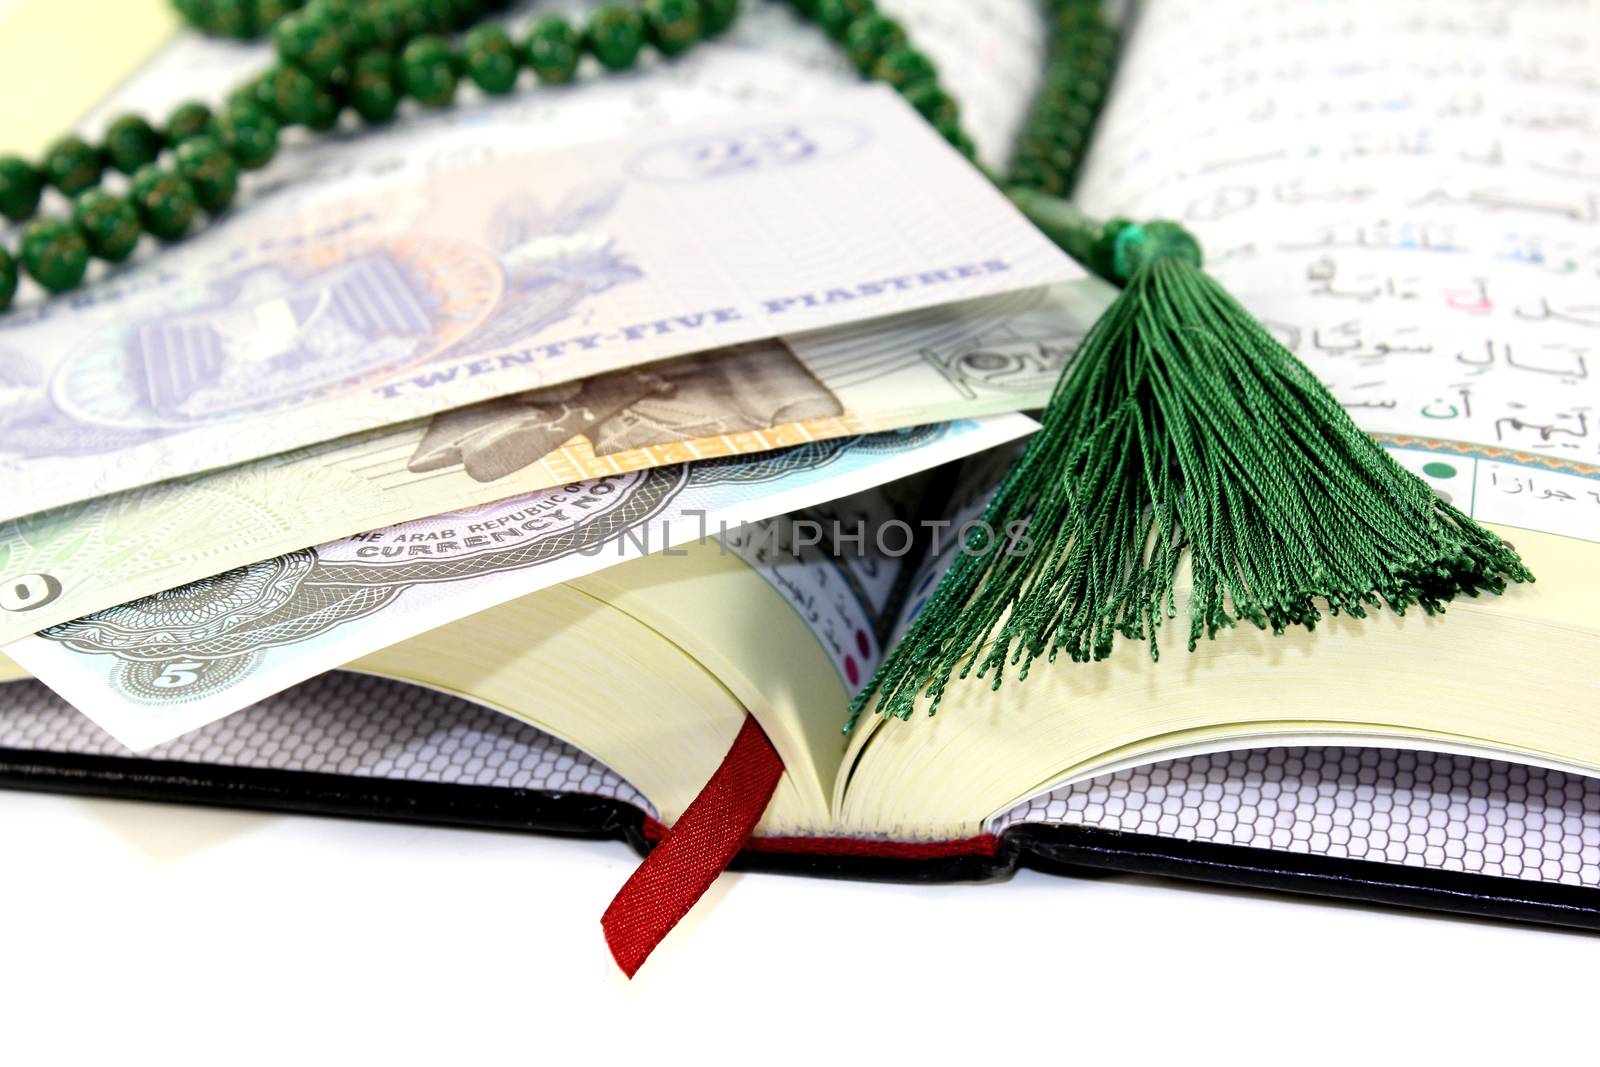 whipped Quran with Egyptian currency by discovery